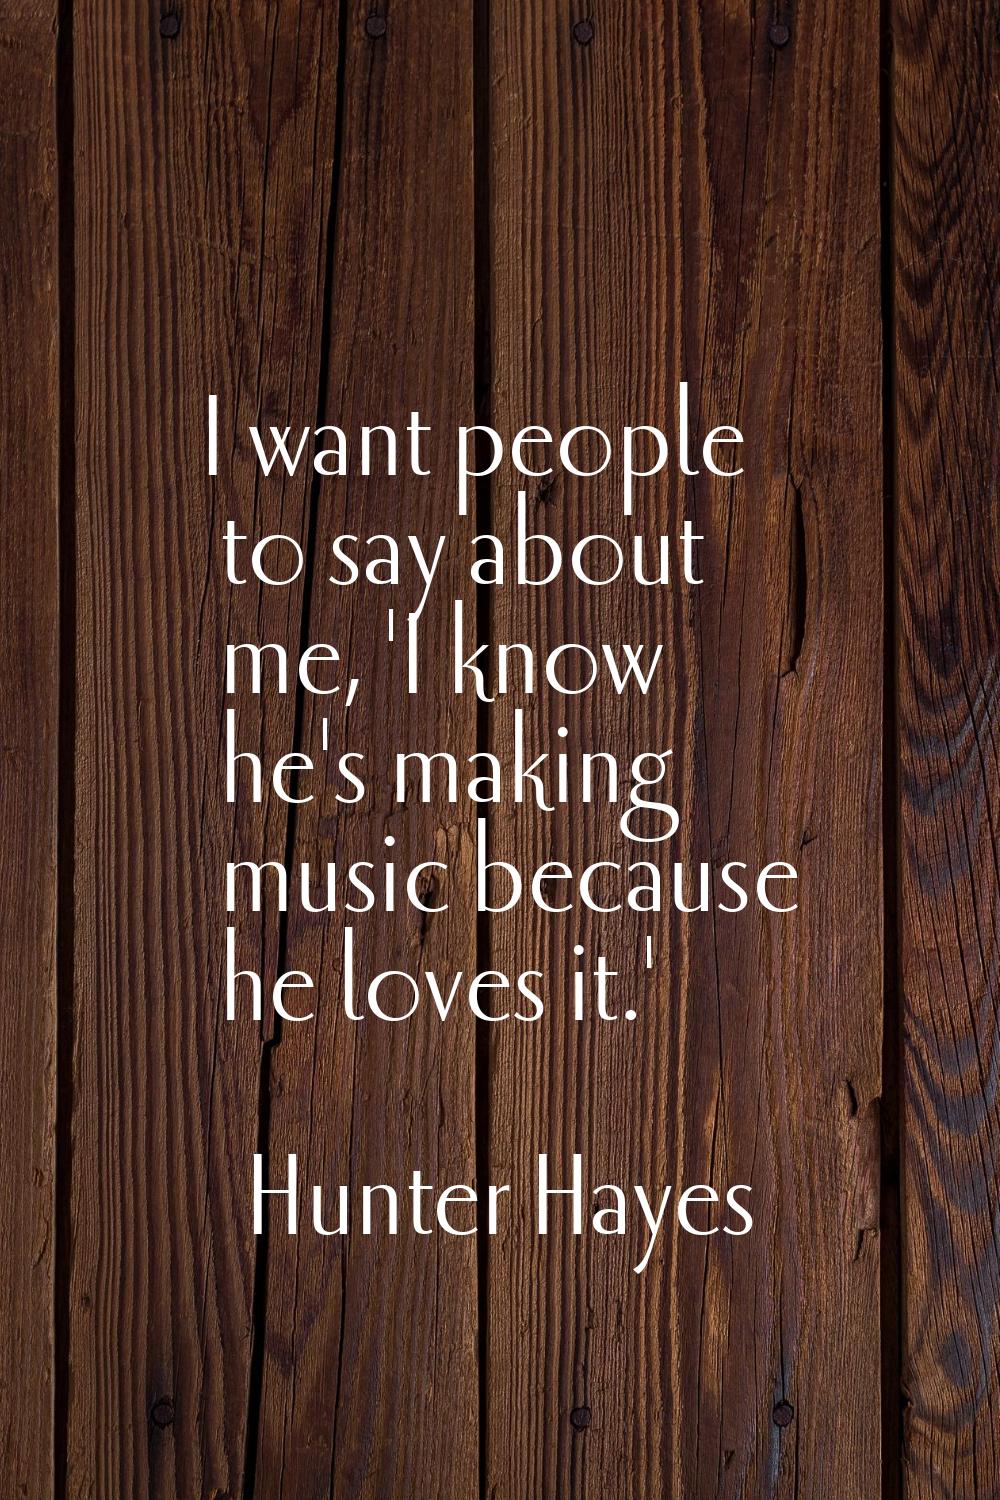 I want people to say about me, 'I know he's making music because he loves it.'